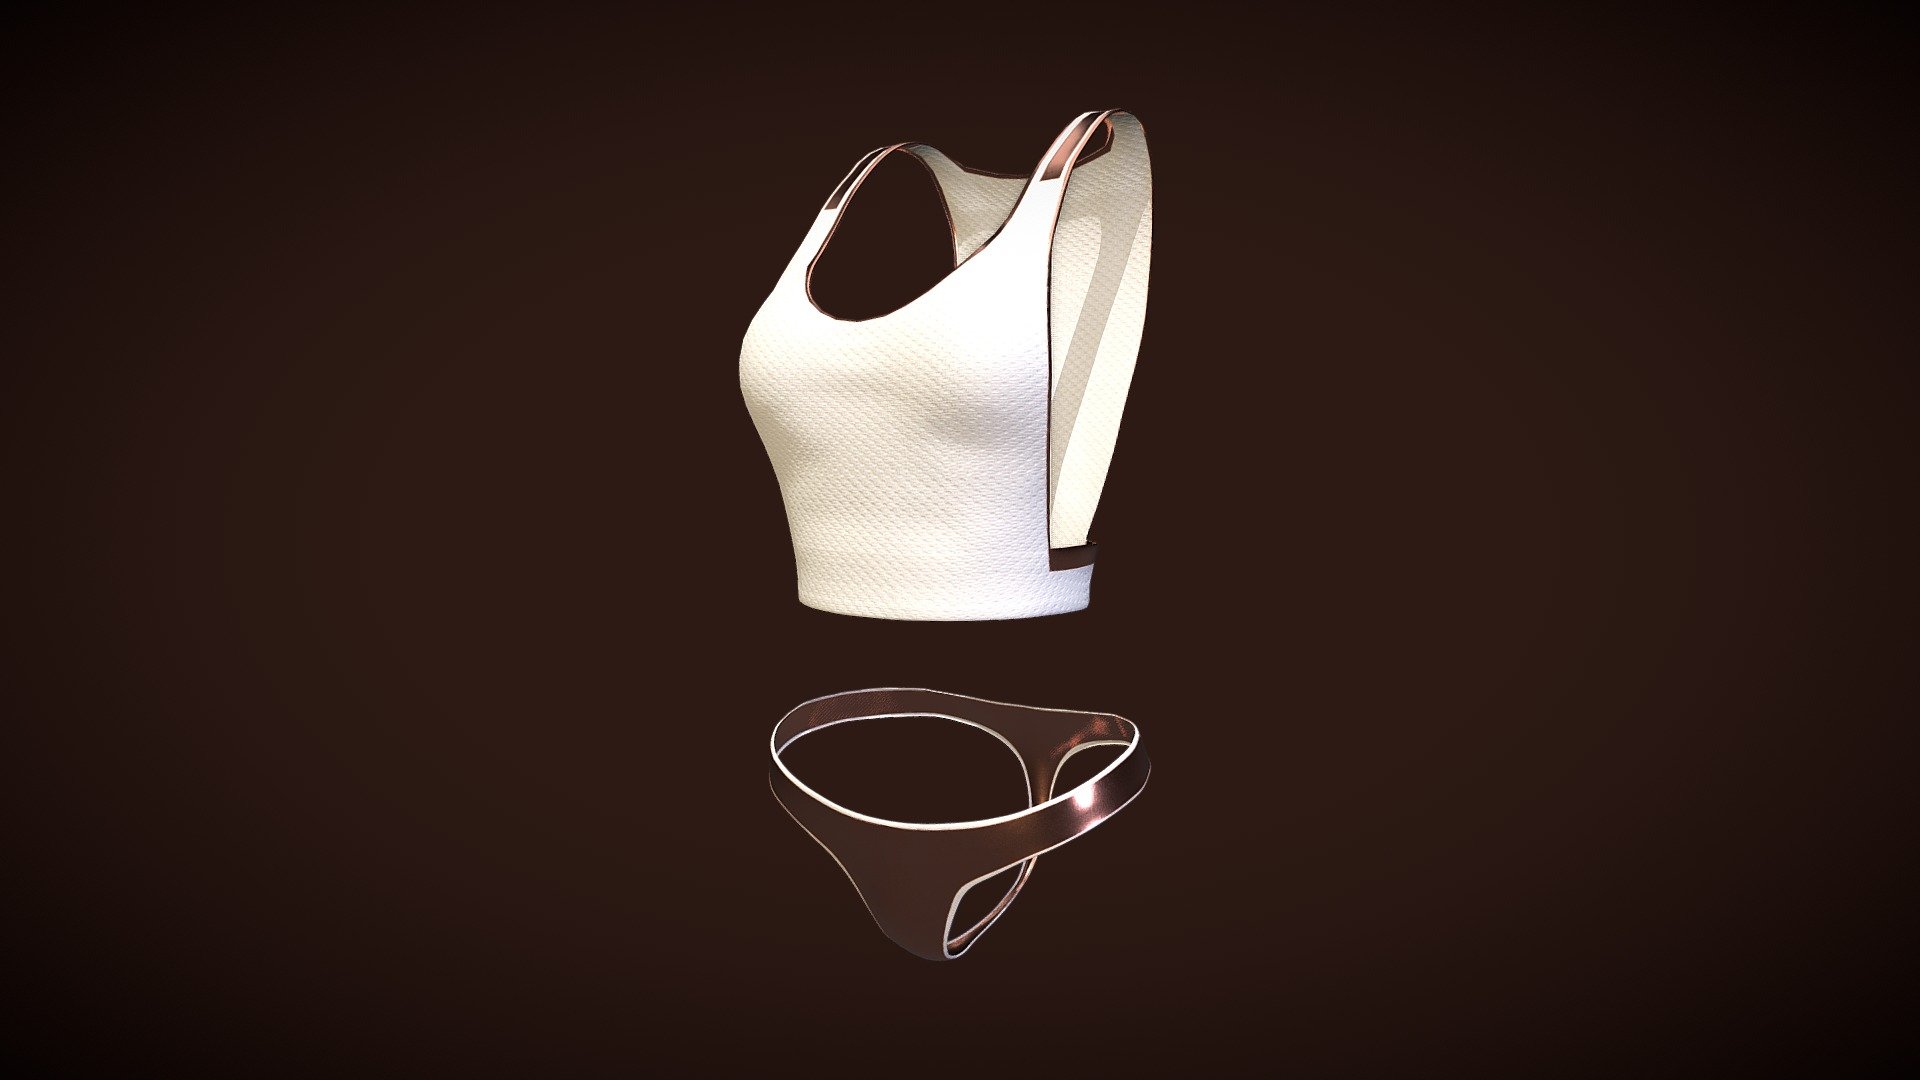 Cyberpunk - Dreamer Underwear - Set A

This clothing is not rigged.

I have included an FBX file along with the dae file from Substance Painter.

Please make sure to inspect the model thoroughly before making your purchase.

If there are any issues please message me before leaving bad feedback.

I can be contacted through sketchfab and also email and my facebook page.

Email: azazel_d2@hotmail.com

Facebook: https://www.facebook.com/ReaperProductions - Cyberpunk - Dreamer Underwear - Set A - Buy Royalty Free 3D model by Slayerazazel (@azazeld2) 3d model